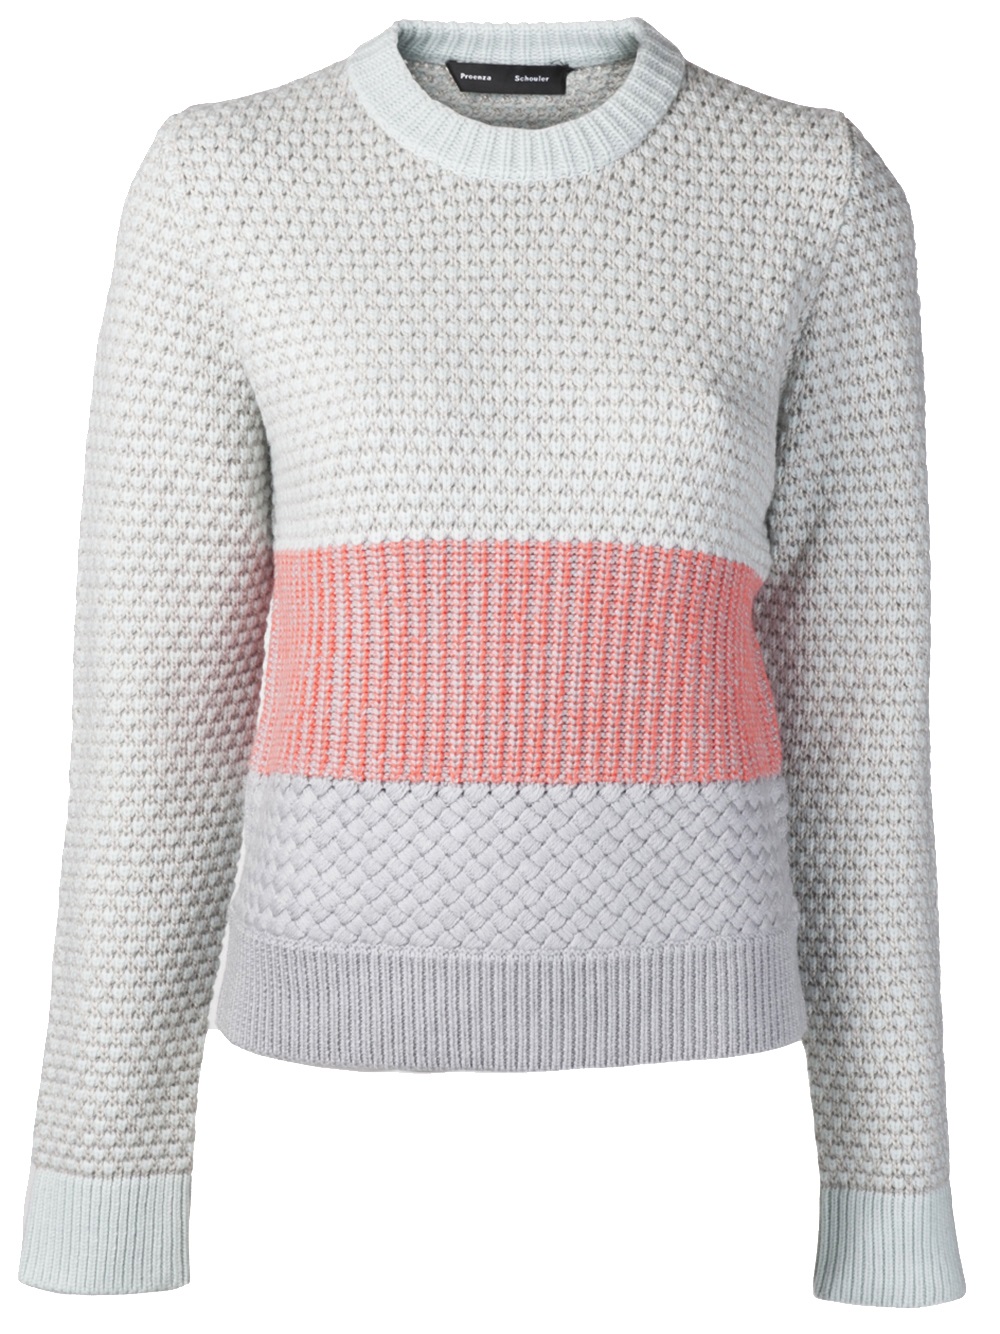 Lyst - Proenza Schouler Colorblock Knit Pullover in White